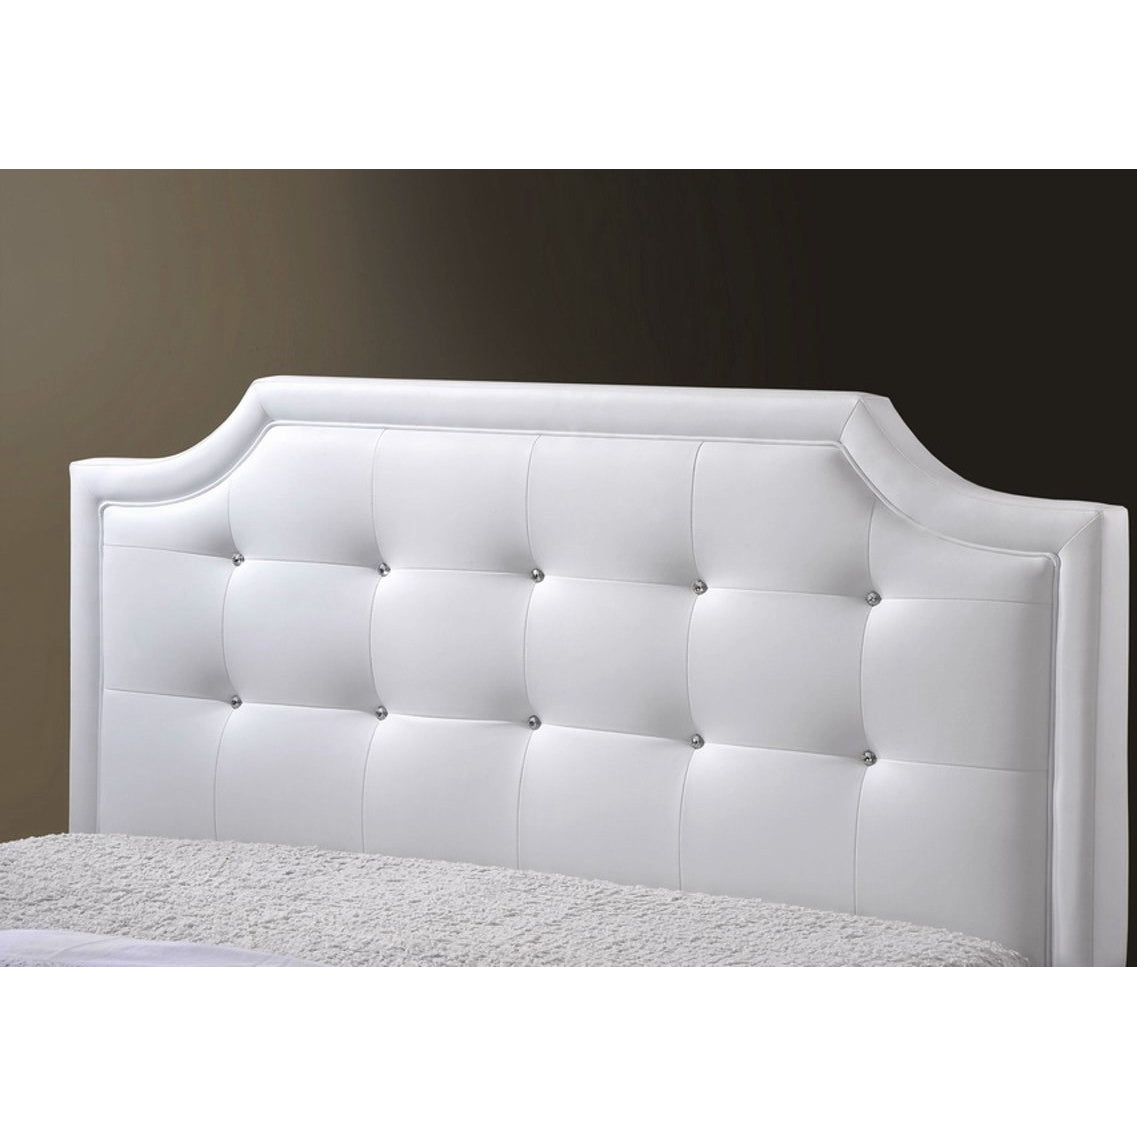 Baxton Studio Carlotta White Modern Bed with Upholstered Headboard - King Size Baxton Studio-beds-Minimal And Modern - 2